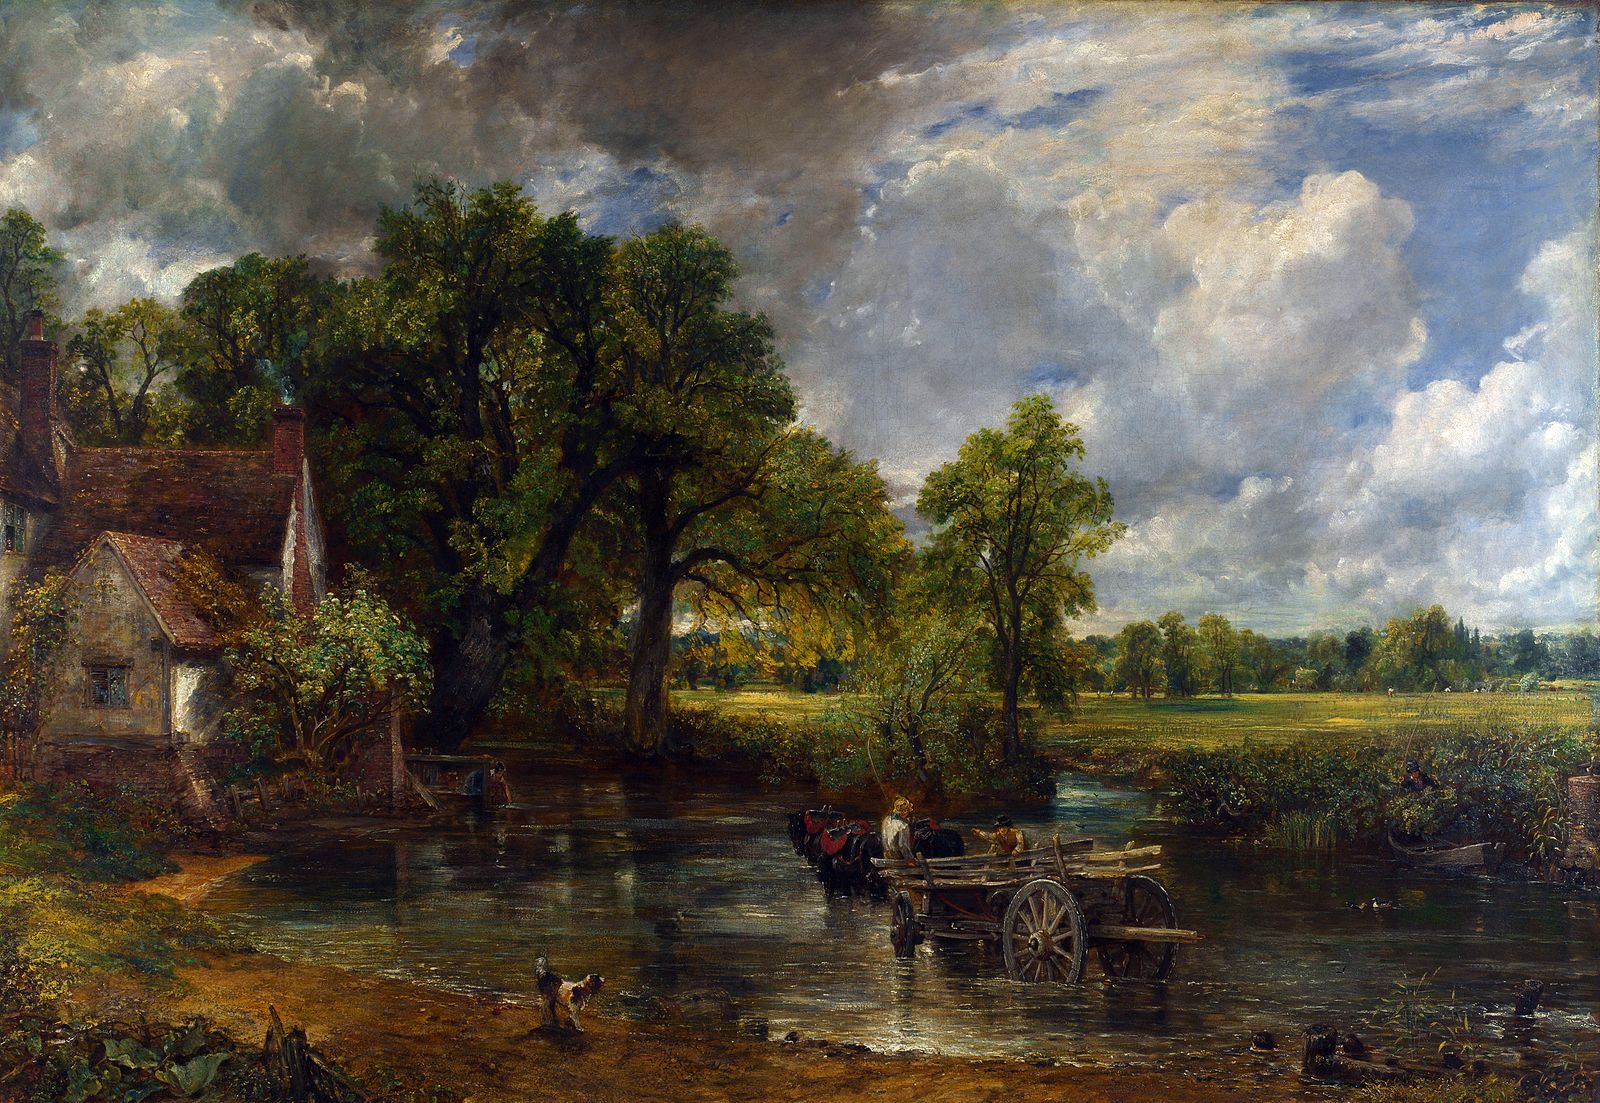 outdoor scene of a man and his wagon crossing a creek